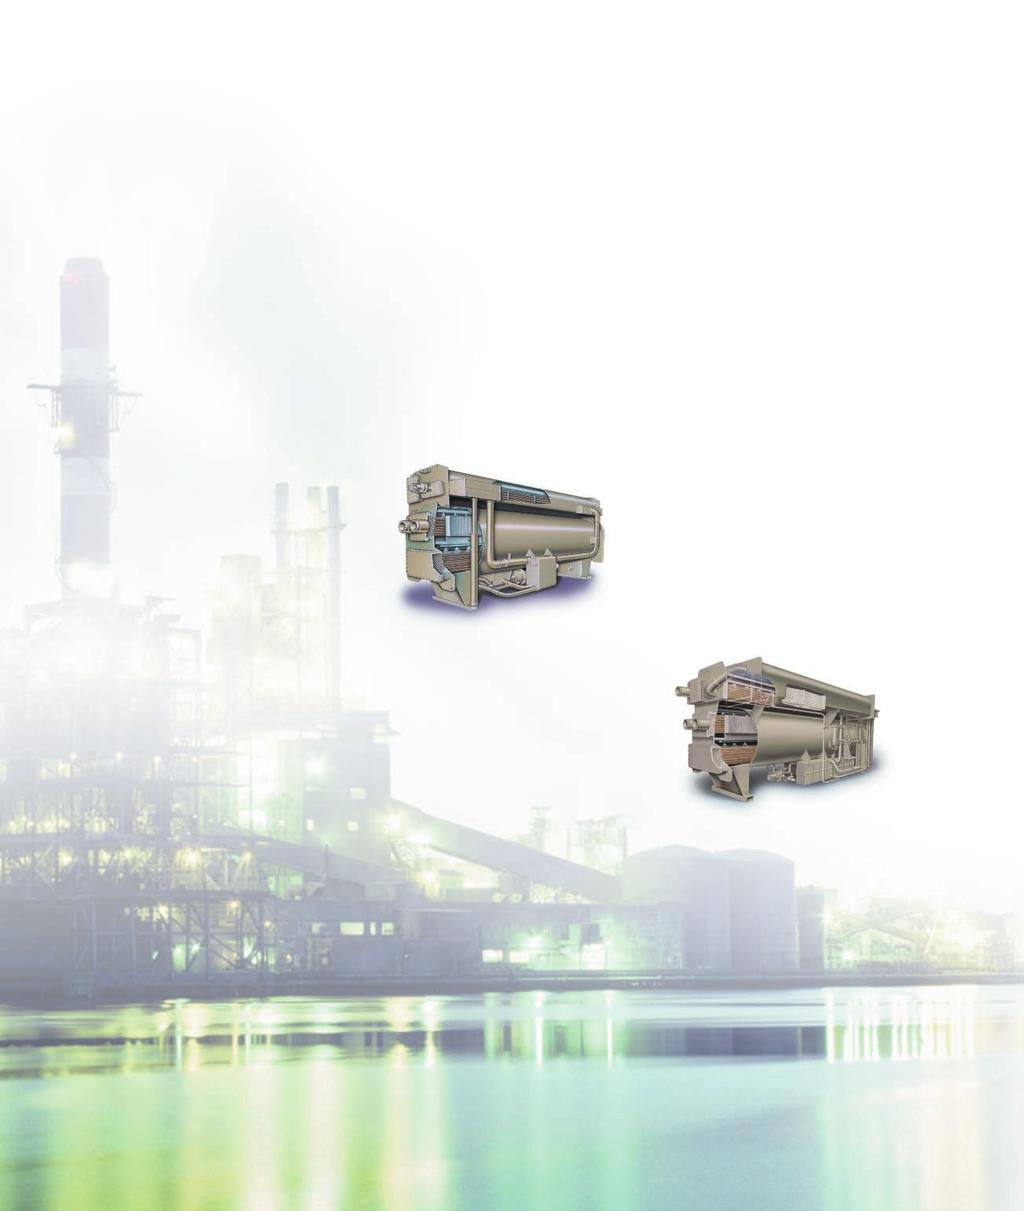 The Horizon TM absorption family now includes a full range of chillers suitable for industrial applications.